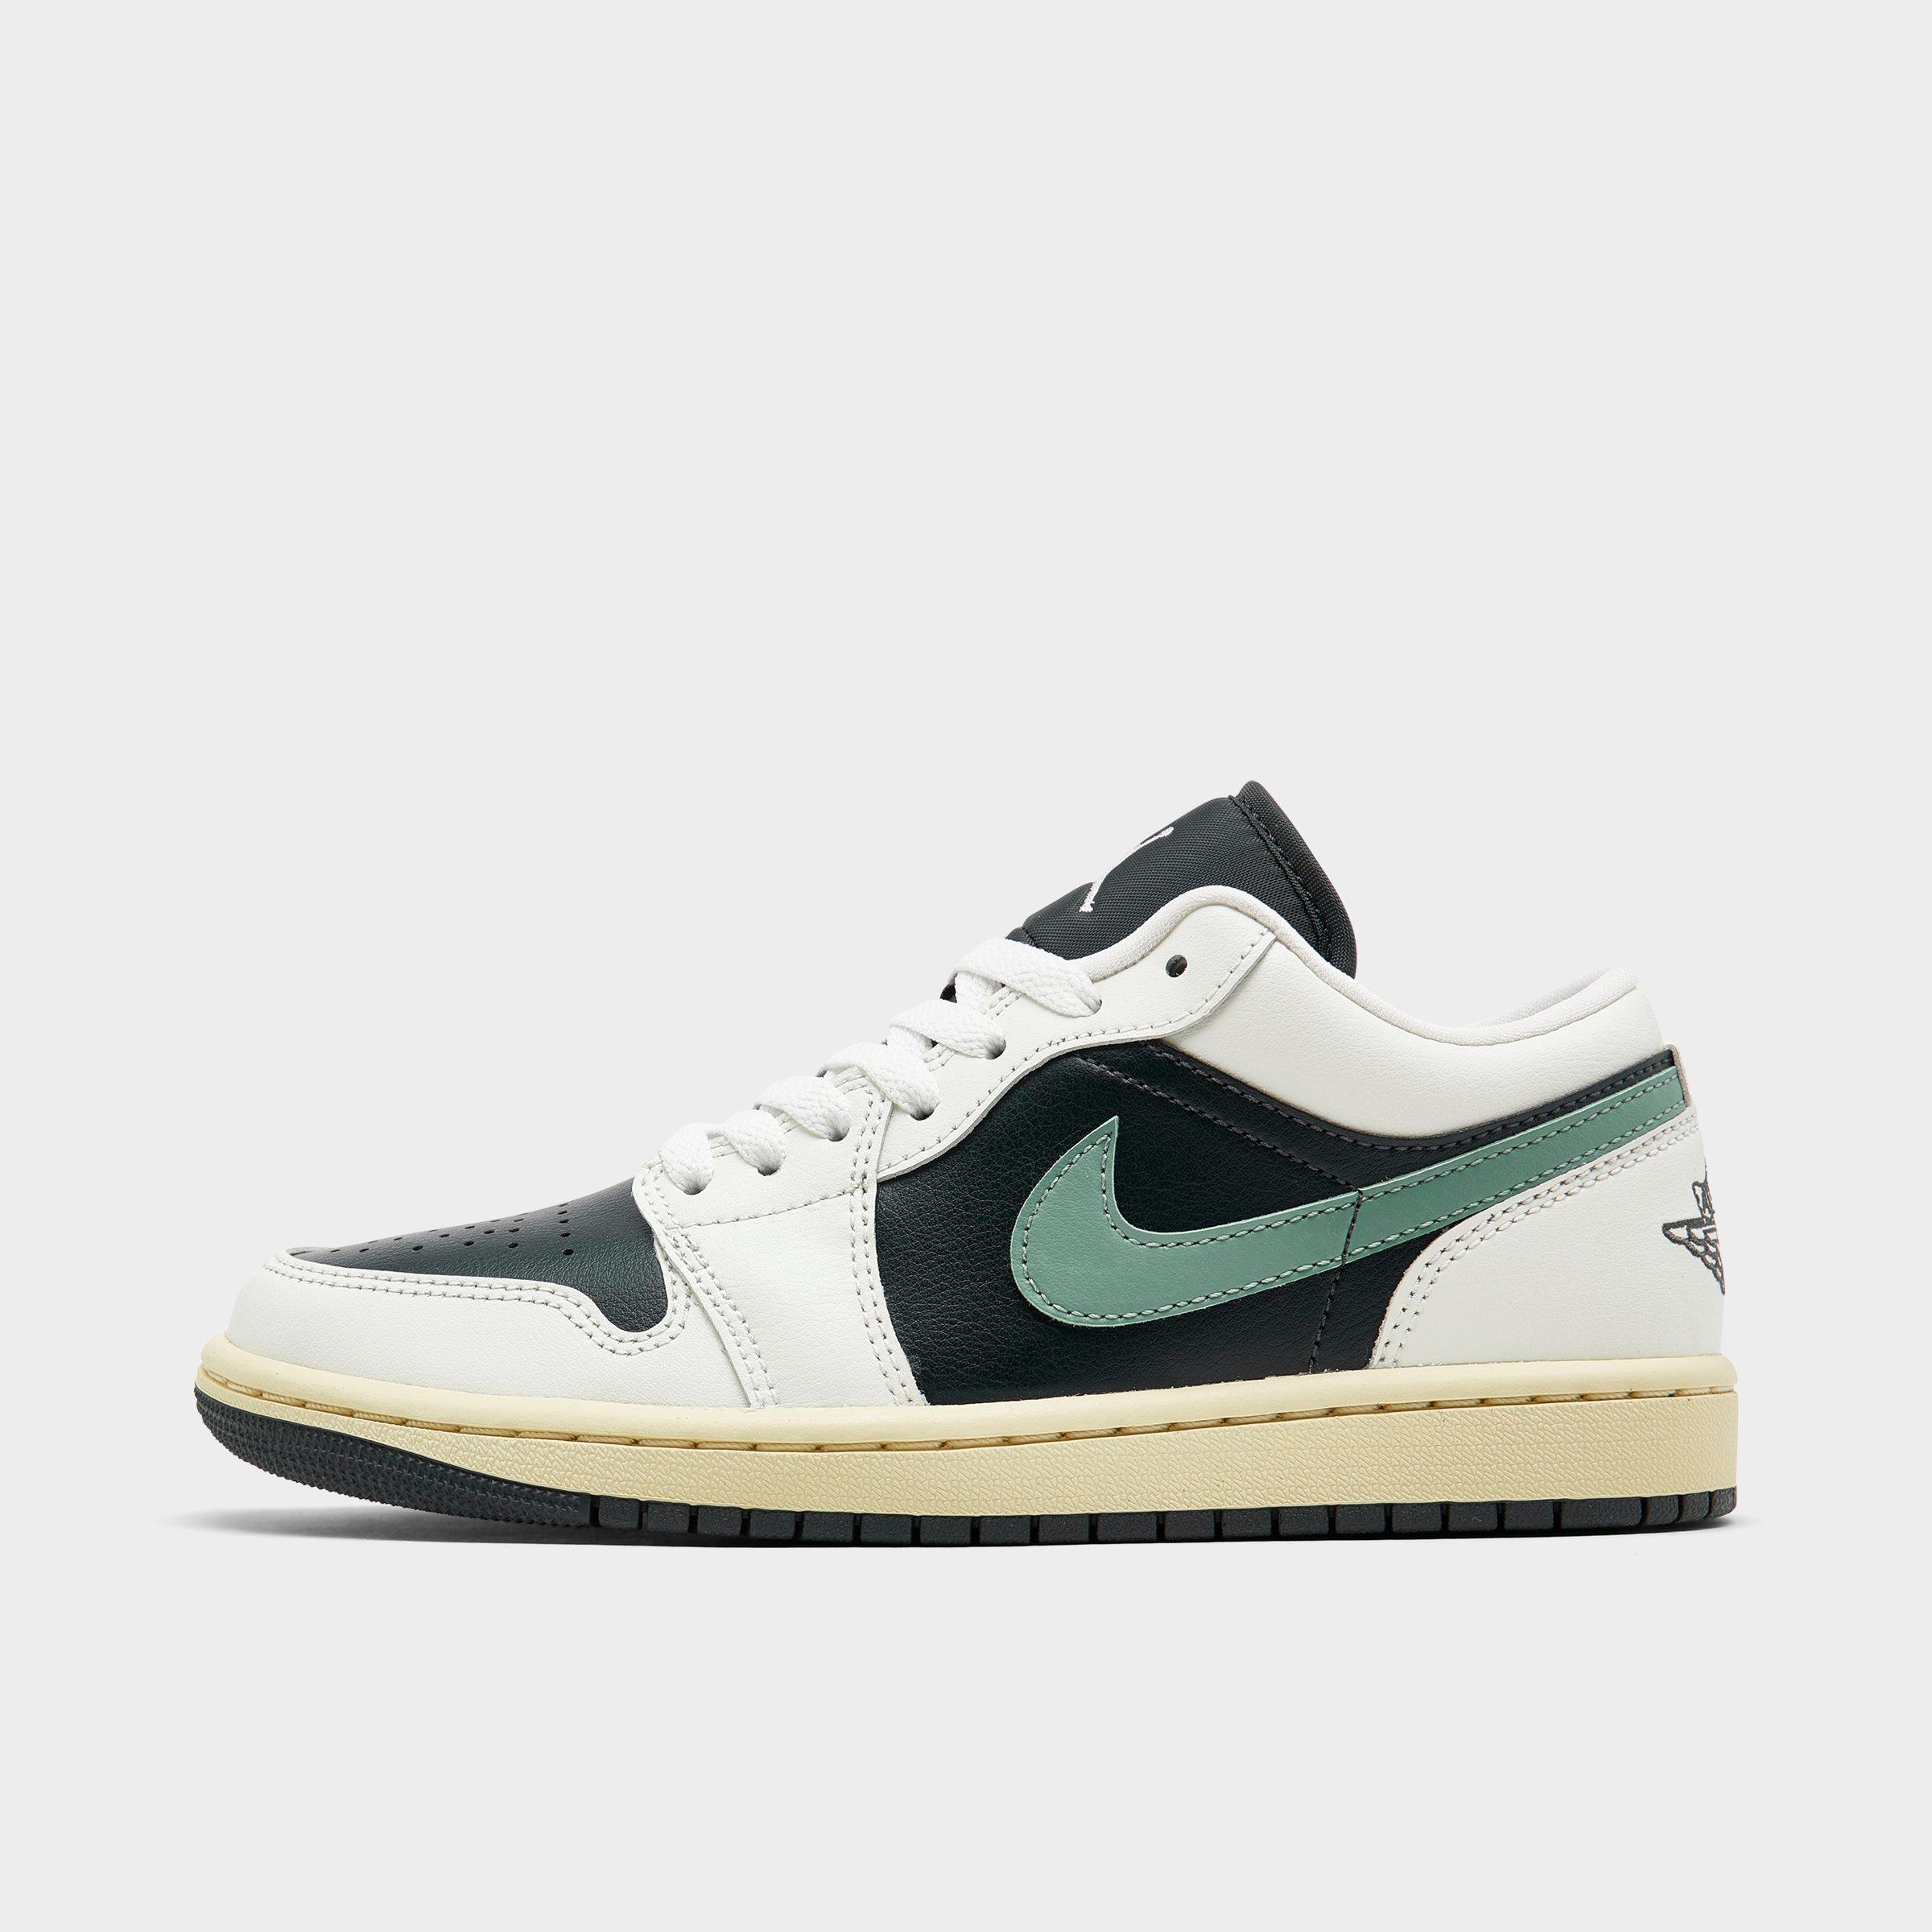 Women's Air Retro 1 Low Casual Shoes